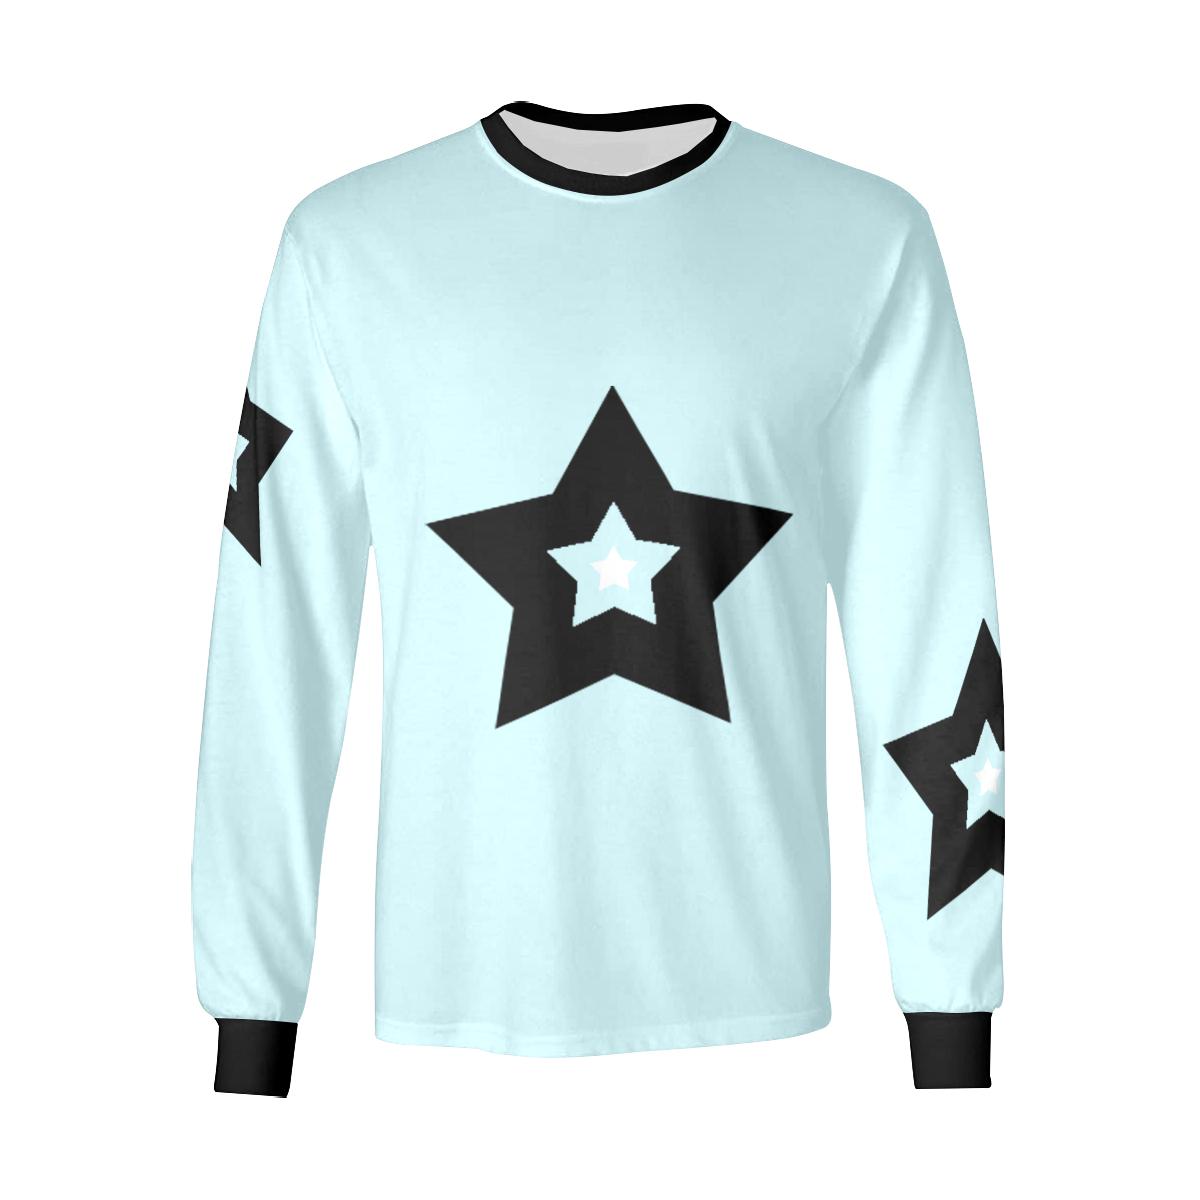 Bulky Stars. long sleeve T-shirt, Baby blue by interestprint - East Hills Casuals